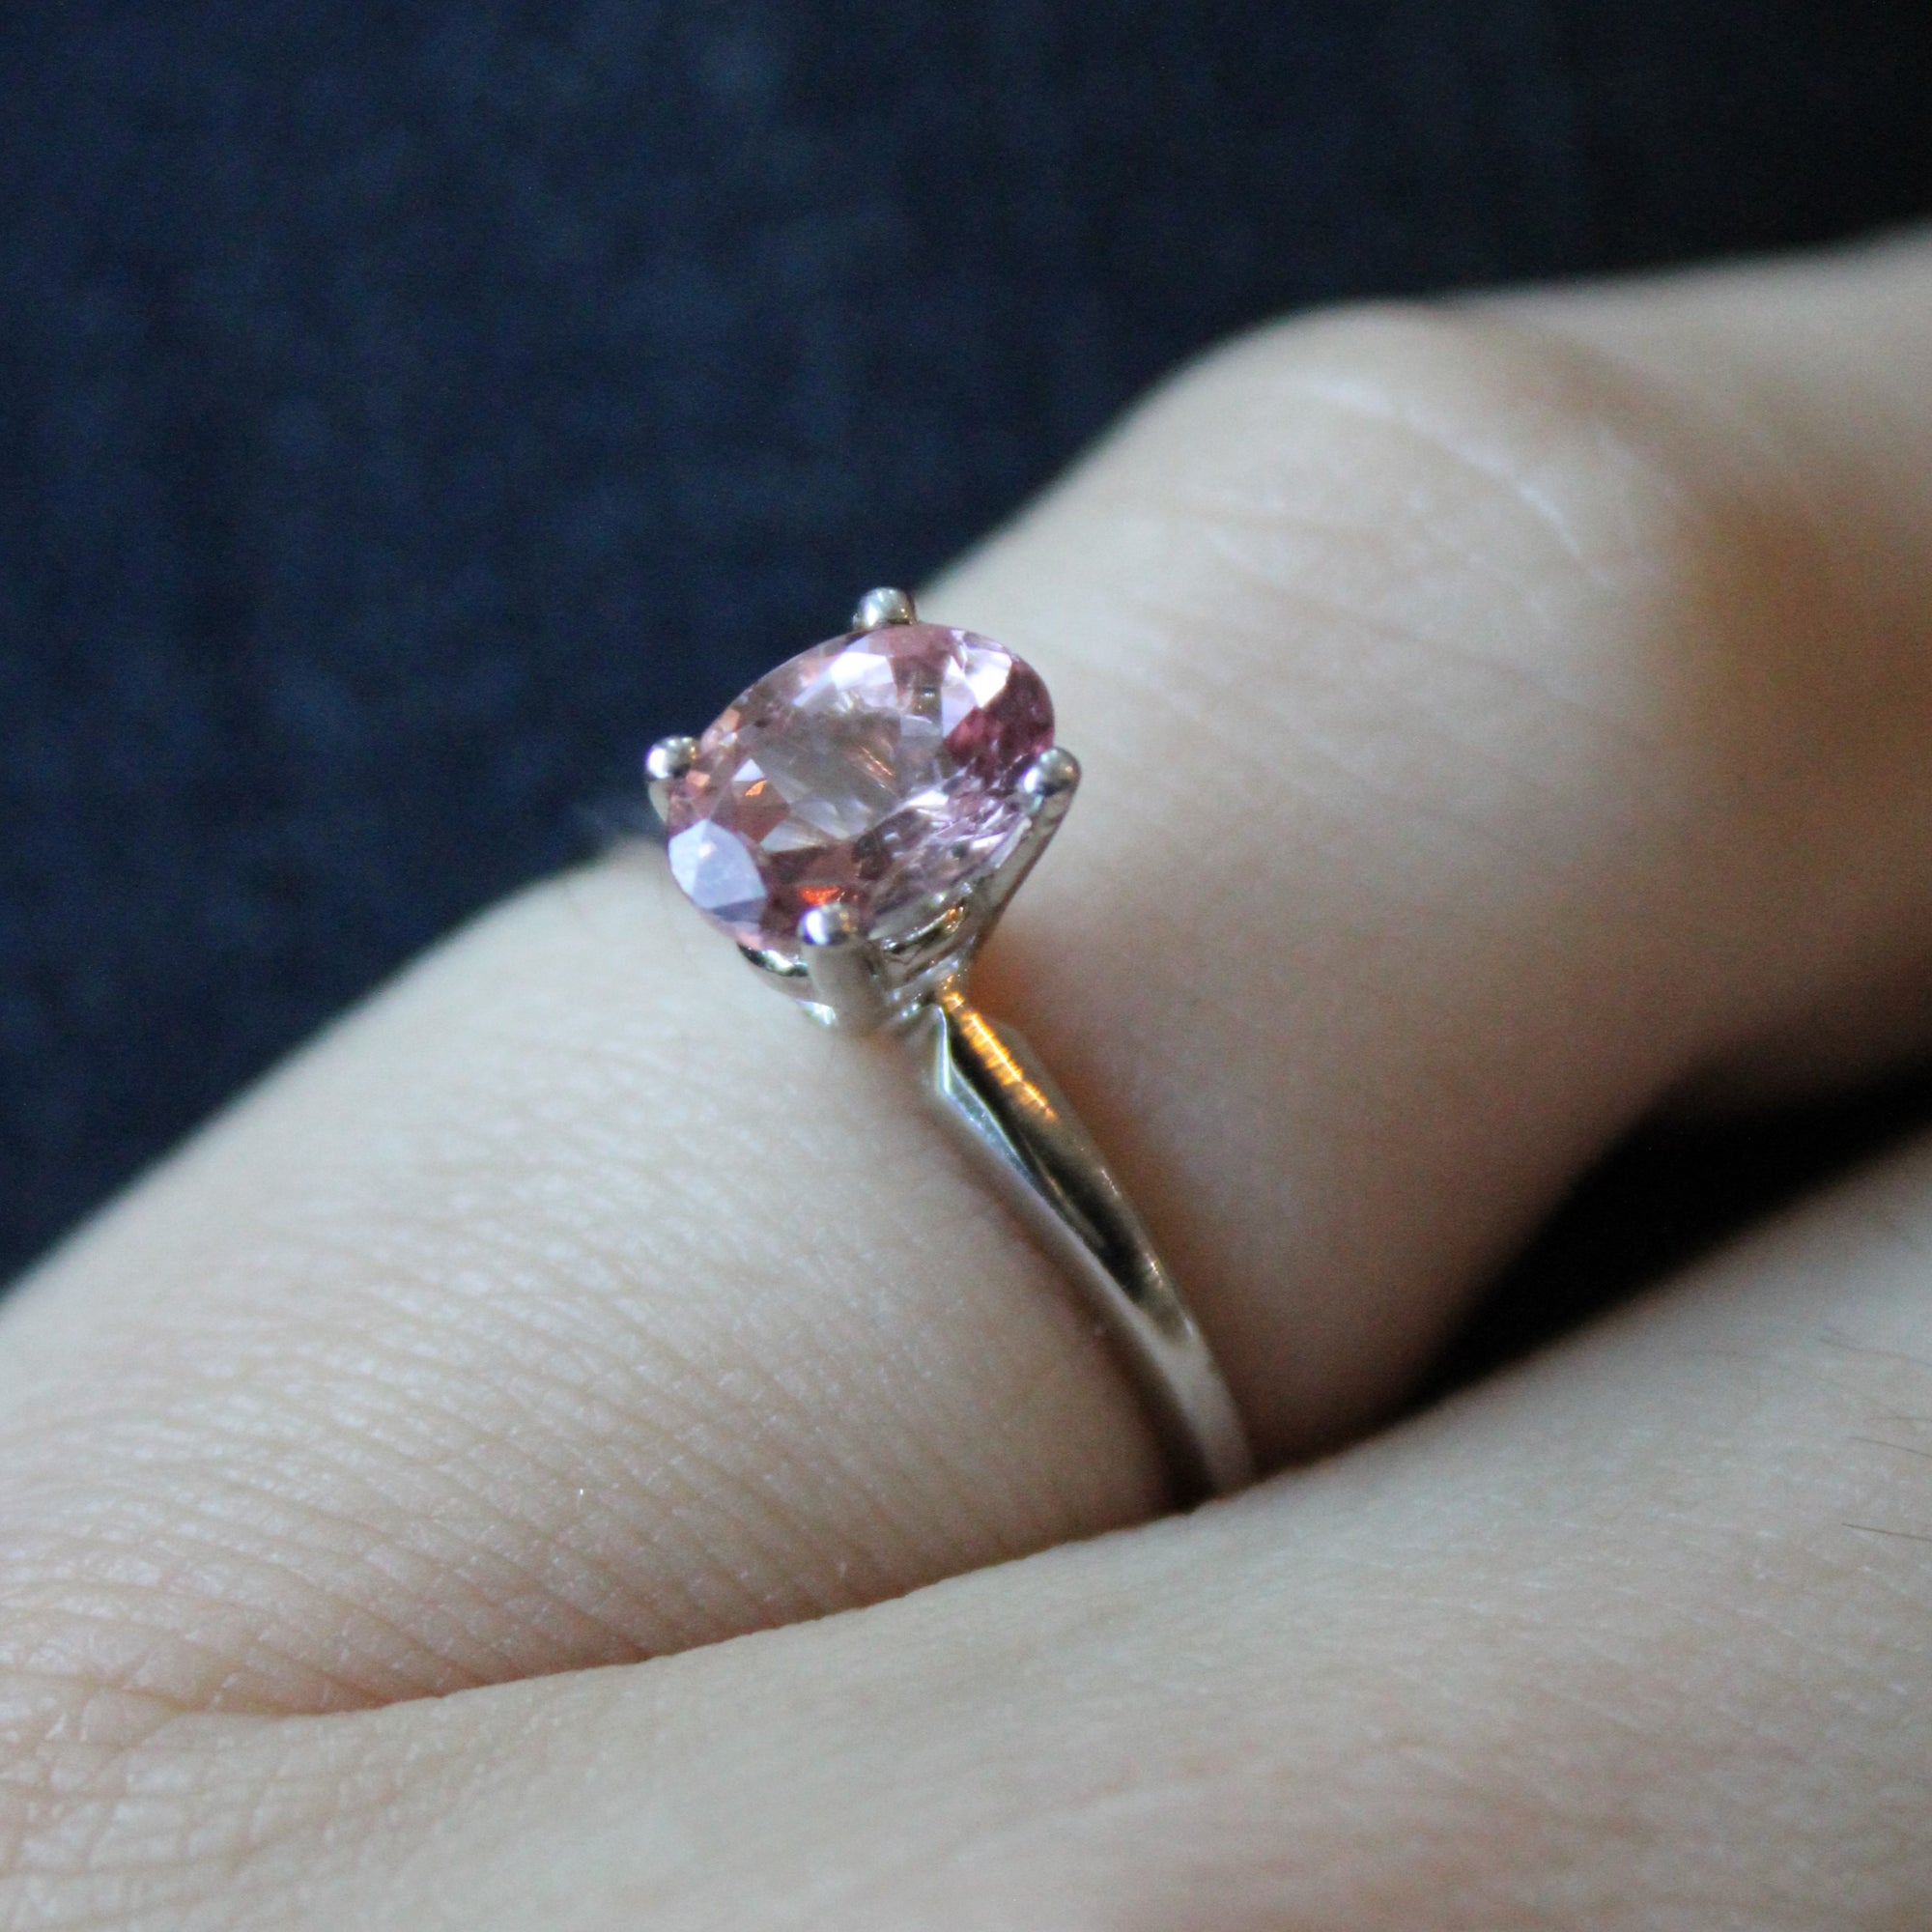 Oval Cut Synthetic Spinel Solitaire Ring | 1.02ct | SZ 5.25 |